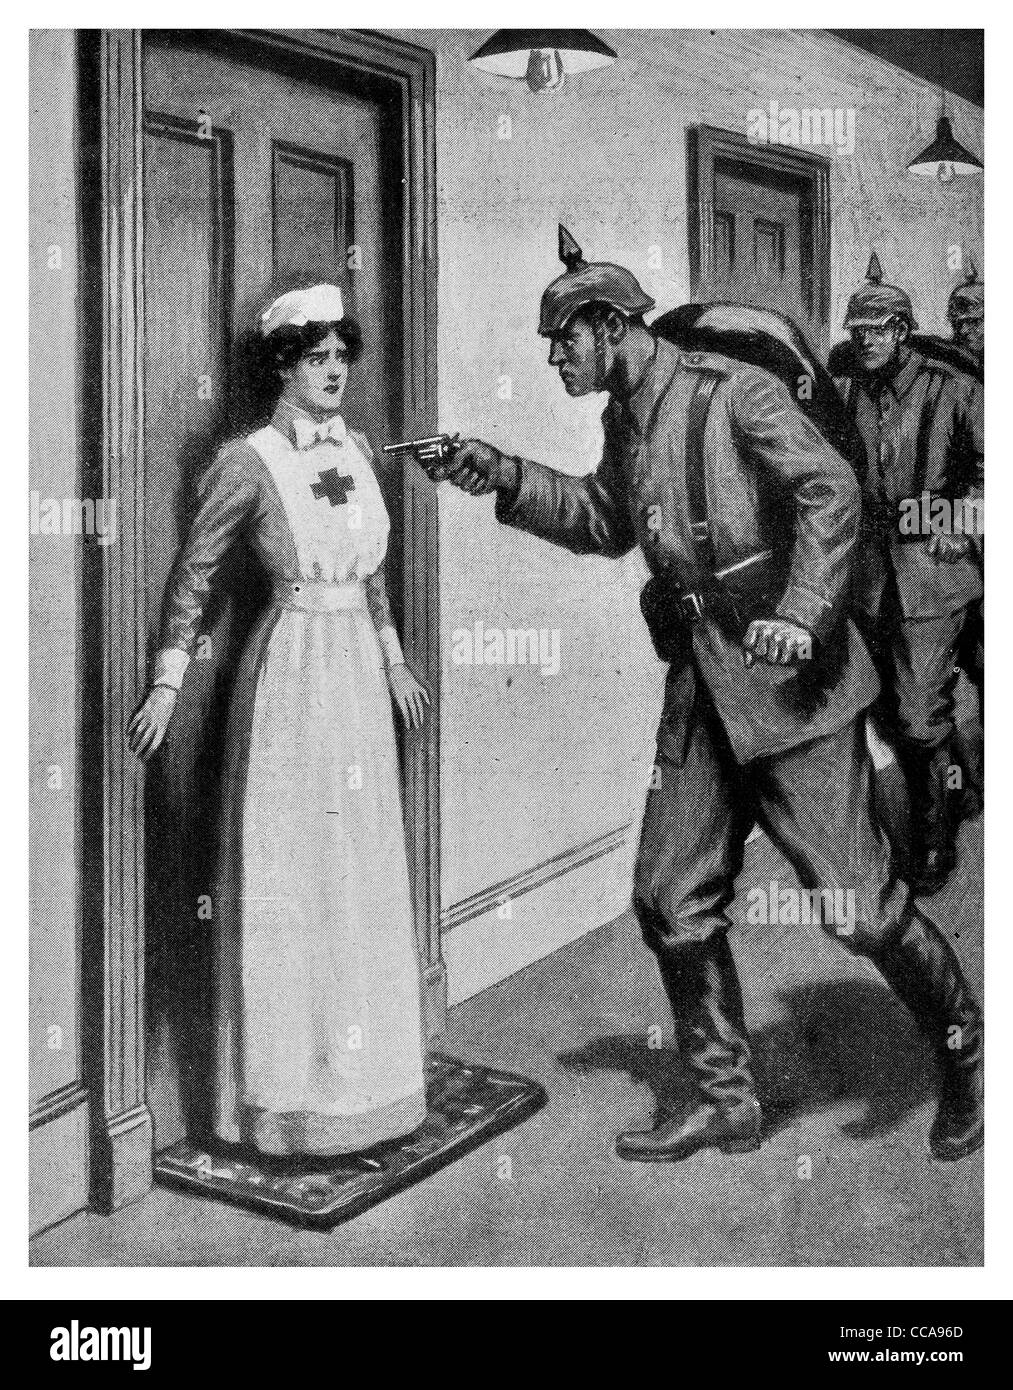 1914 Brave Nurse Agassiz protected wounded enemy German revolver scared bravery hospital protection doorway protect fear clinic Stock Photo